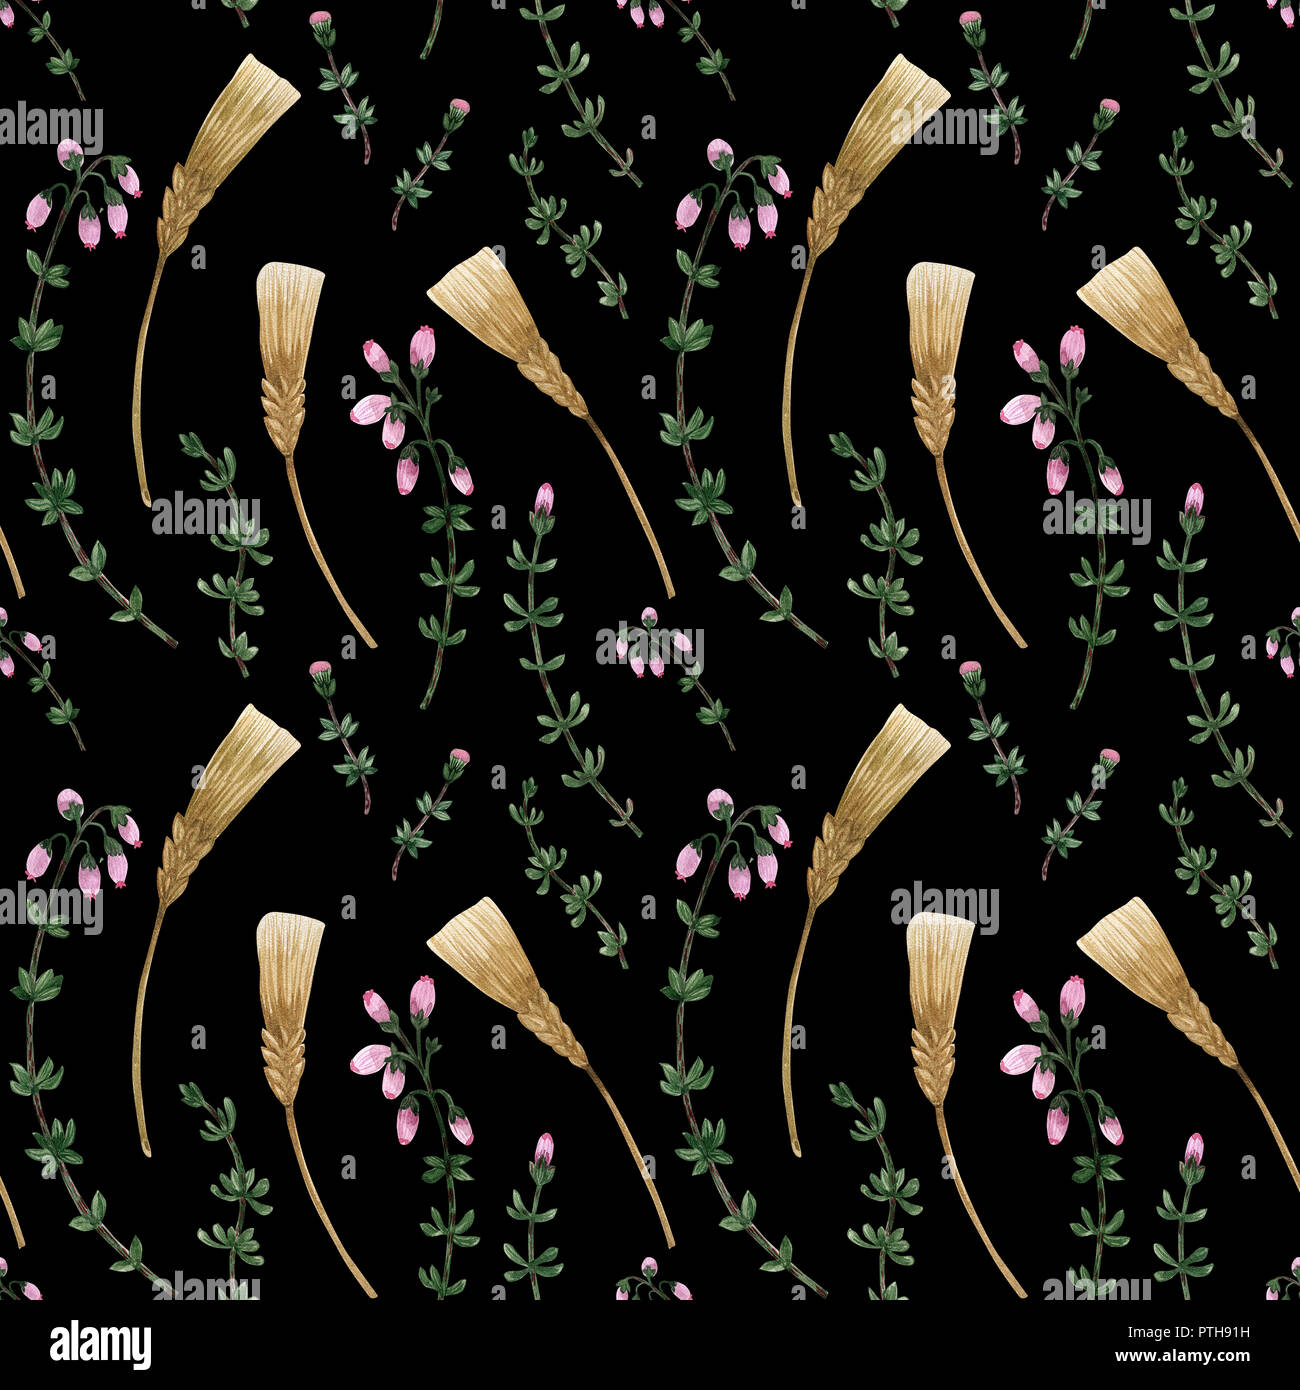 Wild plants of Scotland seamless pattern. Heather and barley. Watercolor on a black background, path included Stock Photo